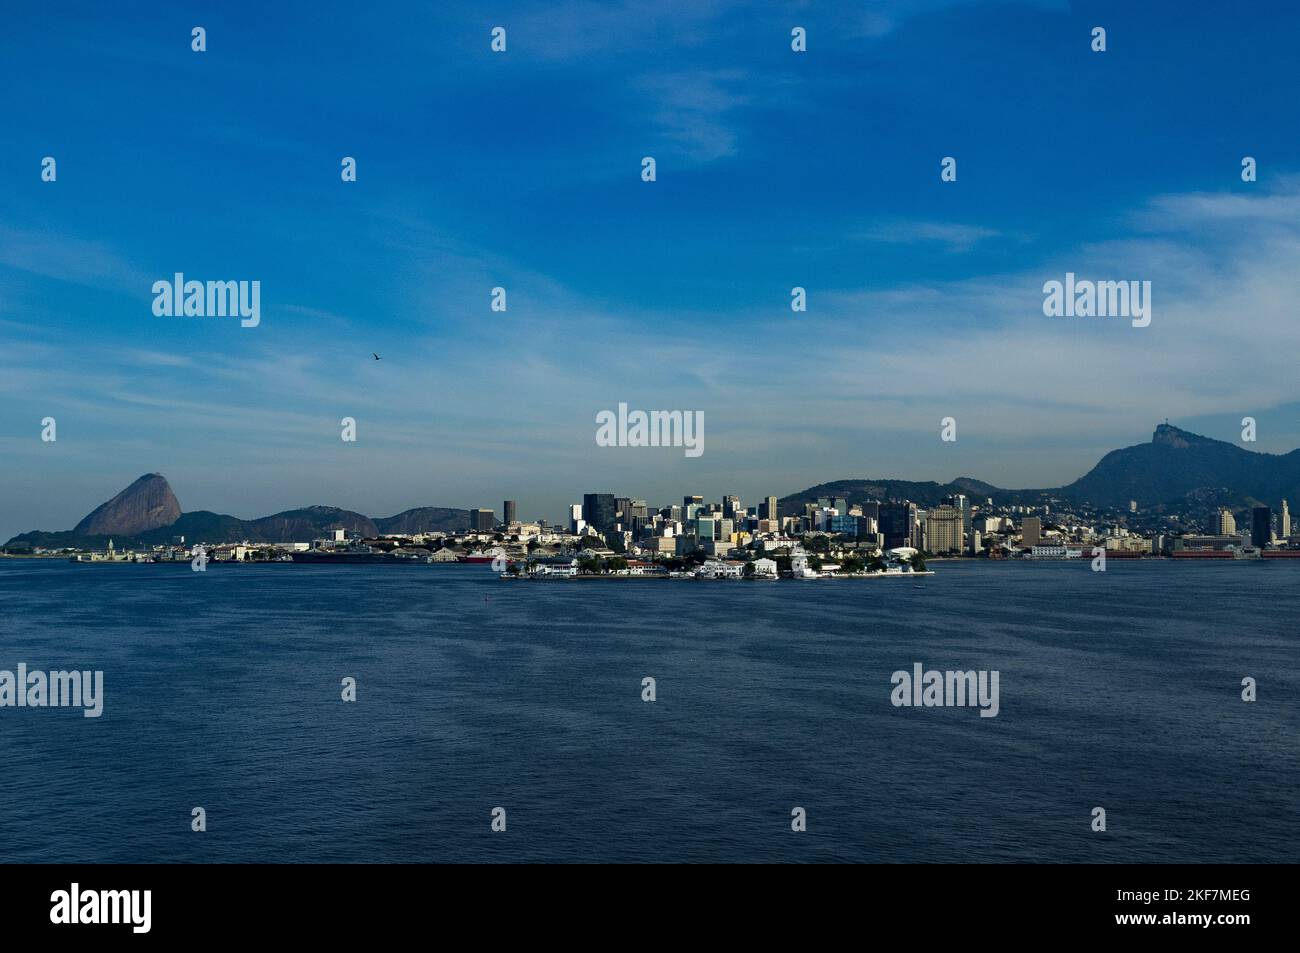 Rio de Janeiro downtown, between the landmarks Sugar Loaf and Christ the Redeemer, seen from Guanabara Bay. Stock Photo